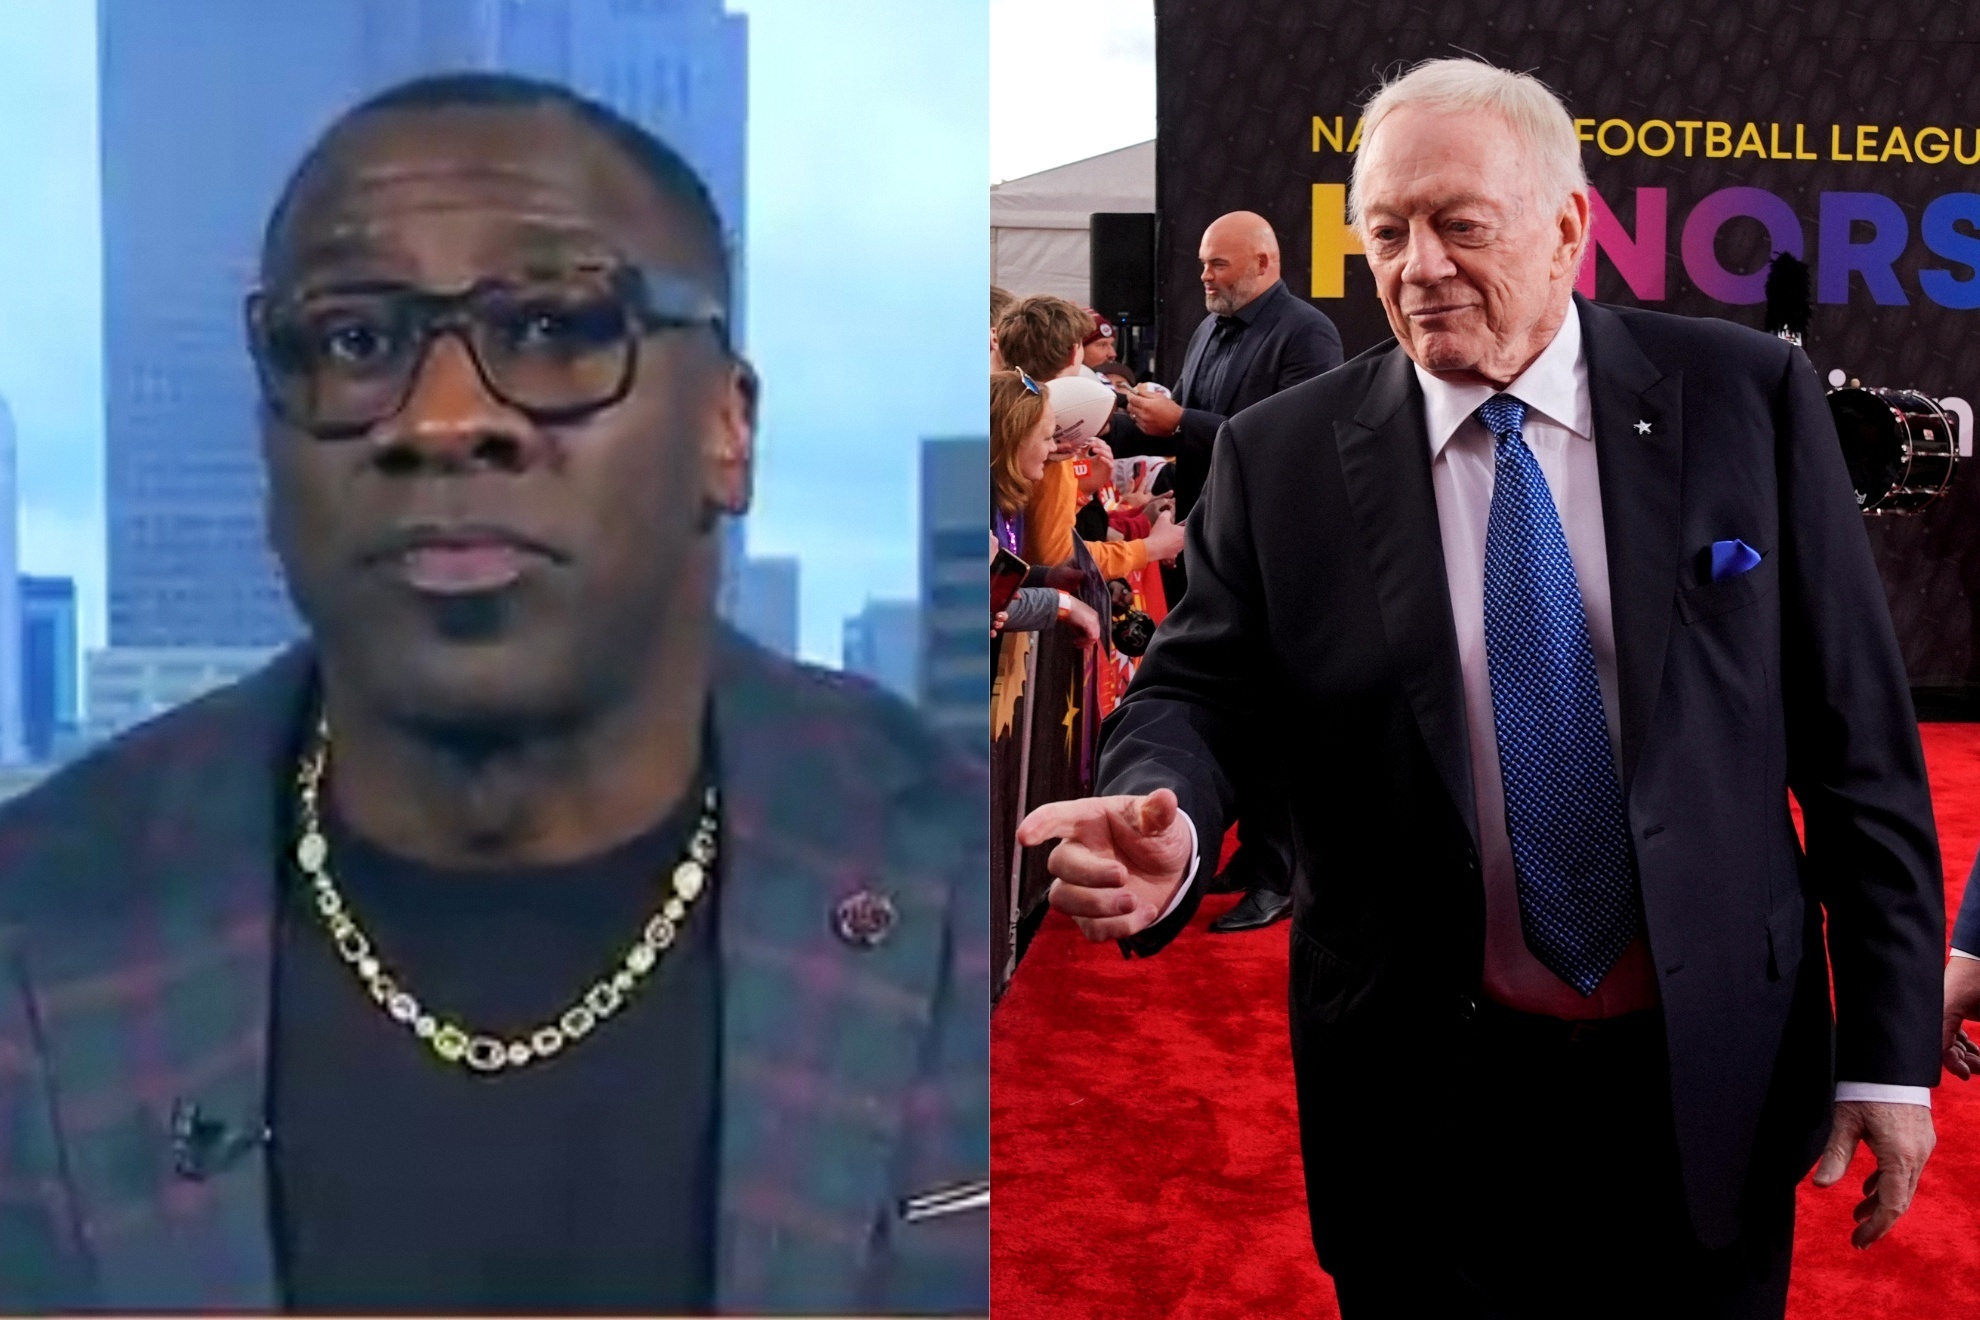 Shannon Sharpe thinks Jerry Jones is at fault for everything.